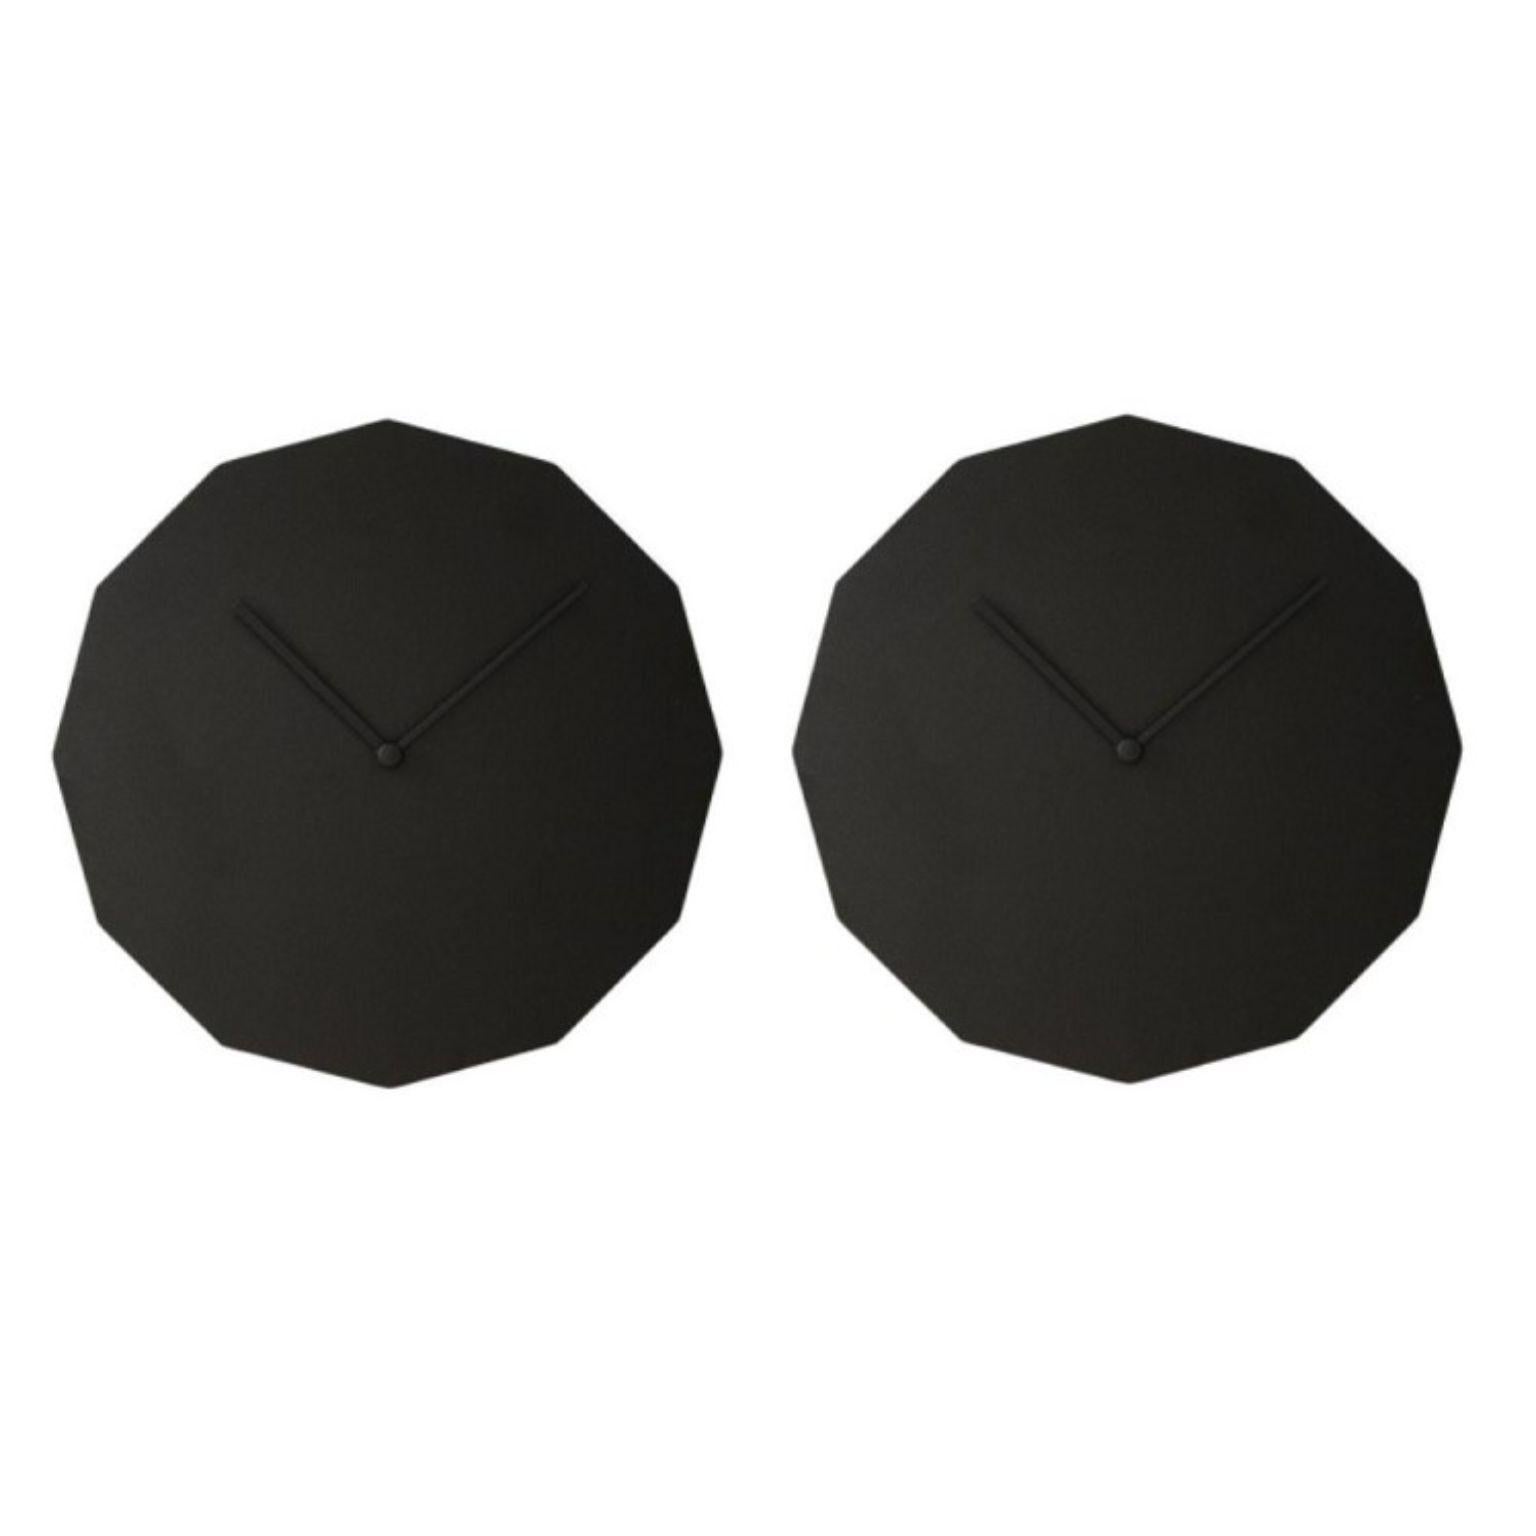 Set of 2 black twelve wall clocks by Sebastian Scherer.
Material: crystal glass, steel.
Dimensions: ø 30 cm.
Also available in mirror steel and brass.
Colour: black
Also available in silk grey, rose, high gloss stainless steel, high gloss